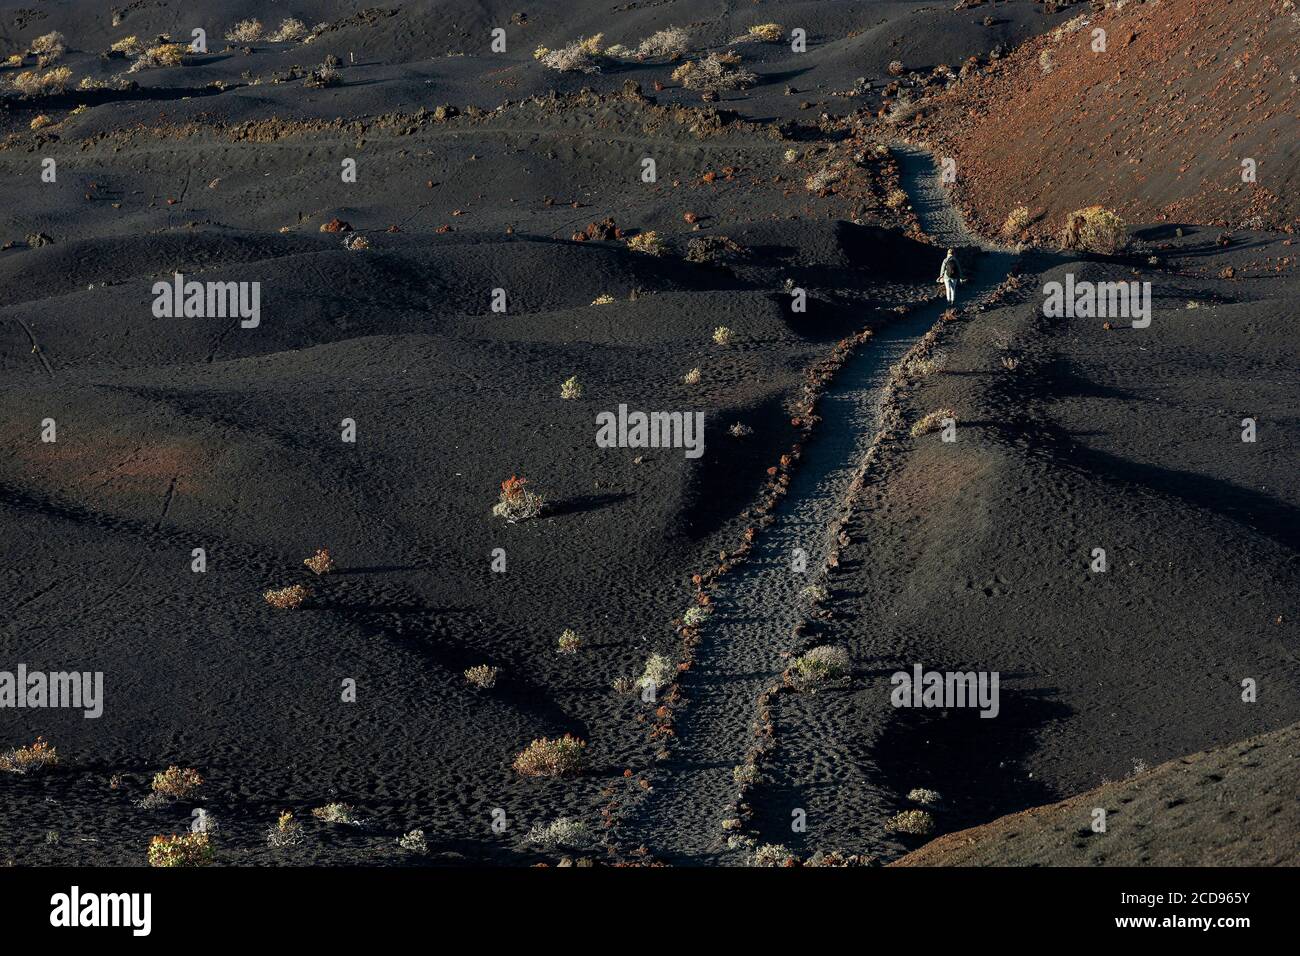 Spain, Canary Islands, La Palma, hiker on a trail in a desert and volcanic environment at sunrise Stock Photo